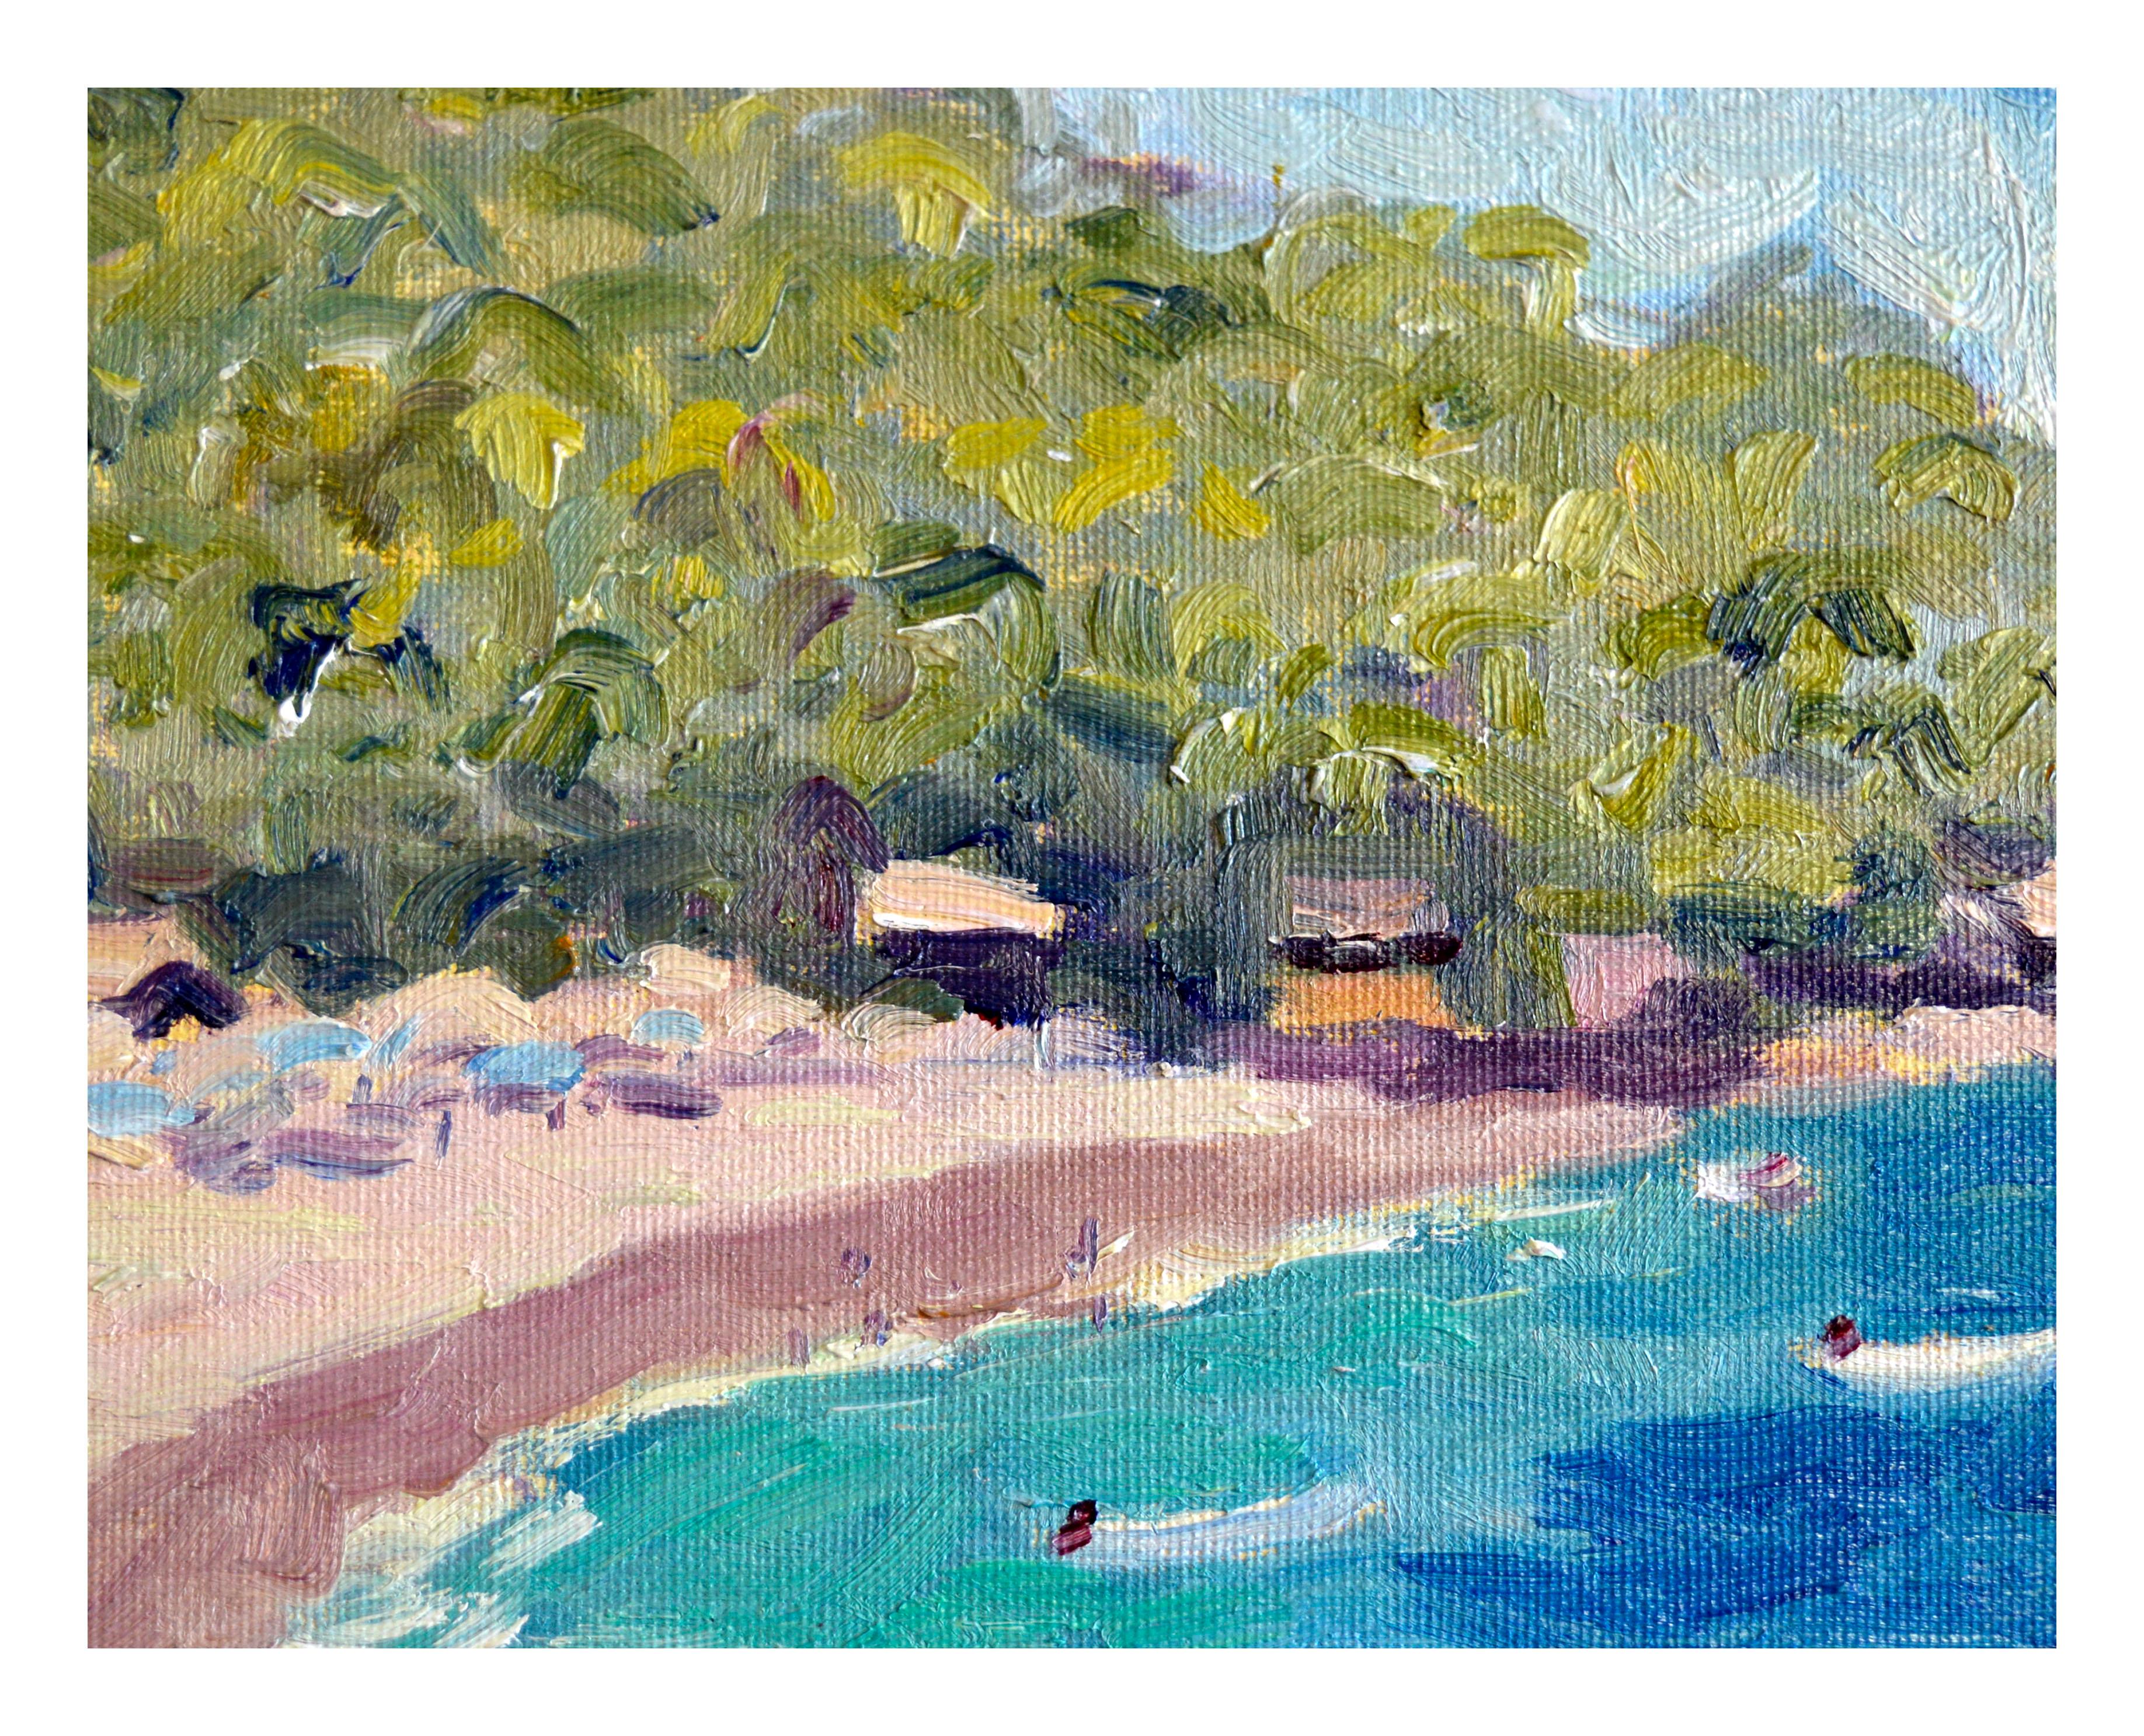 Day at the Beach, West Coast Figurative Landscape  - Painting by Jonathan Farley